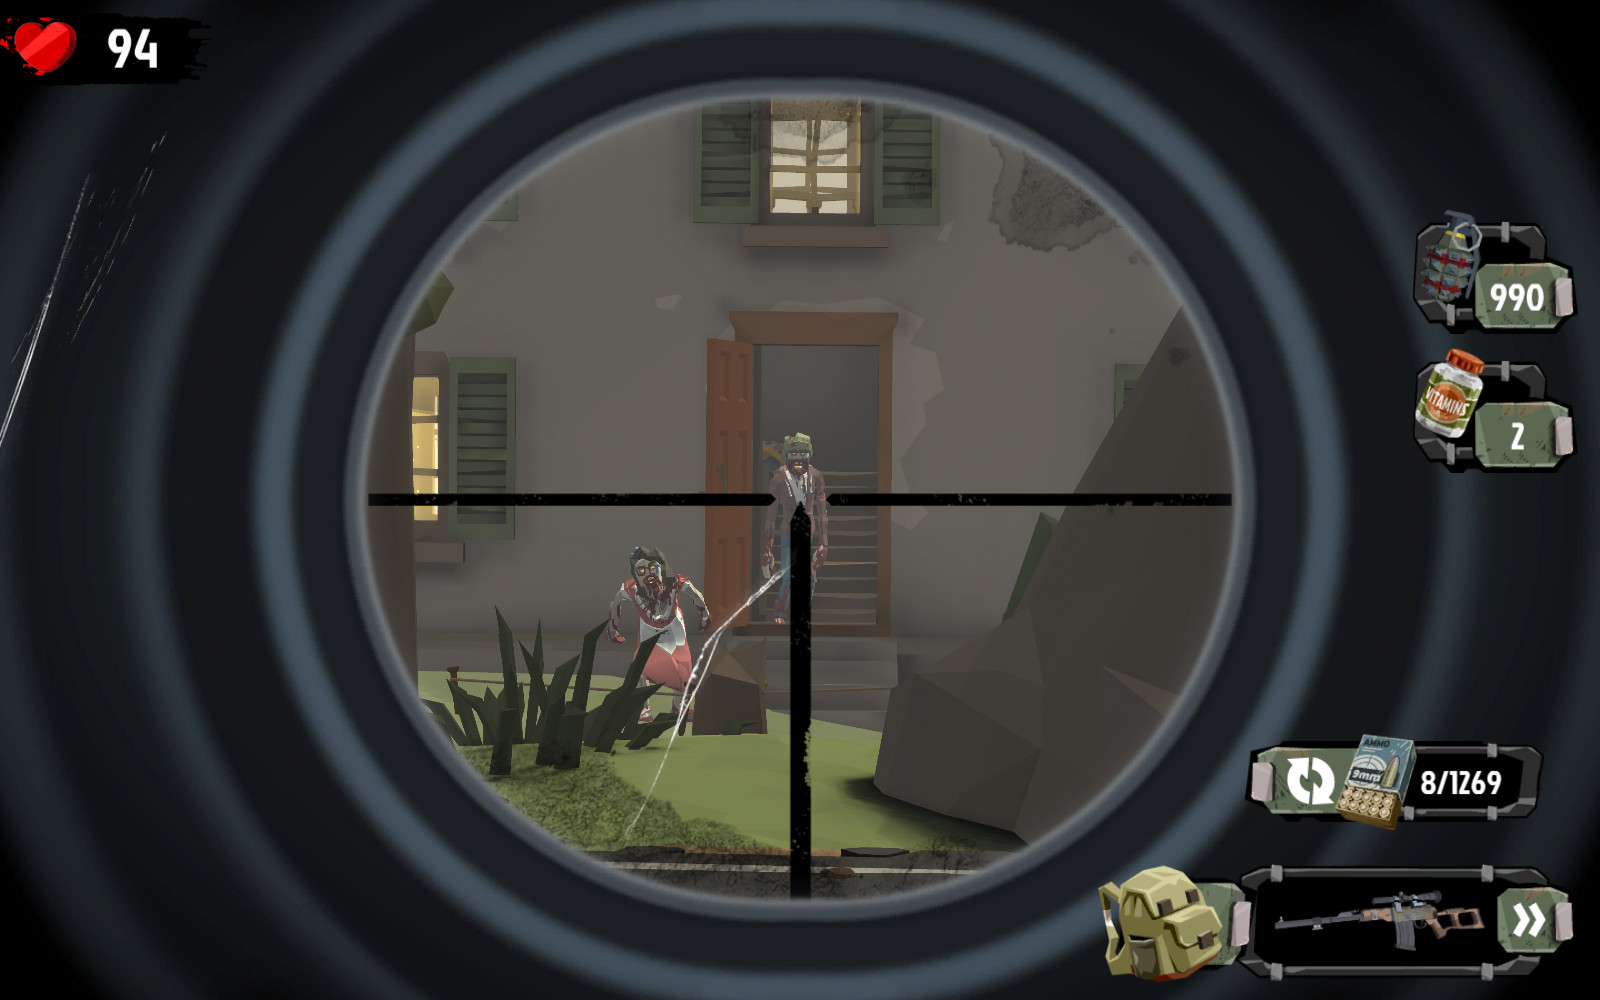 Walking Zombie: Shooter on Steam